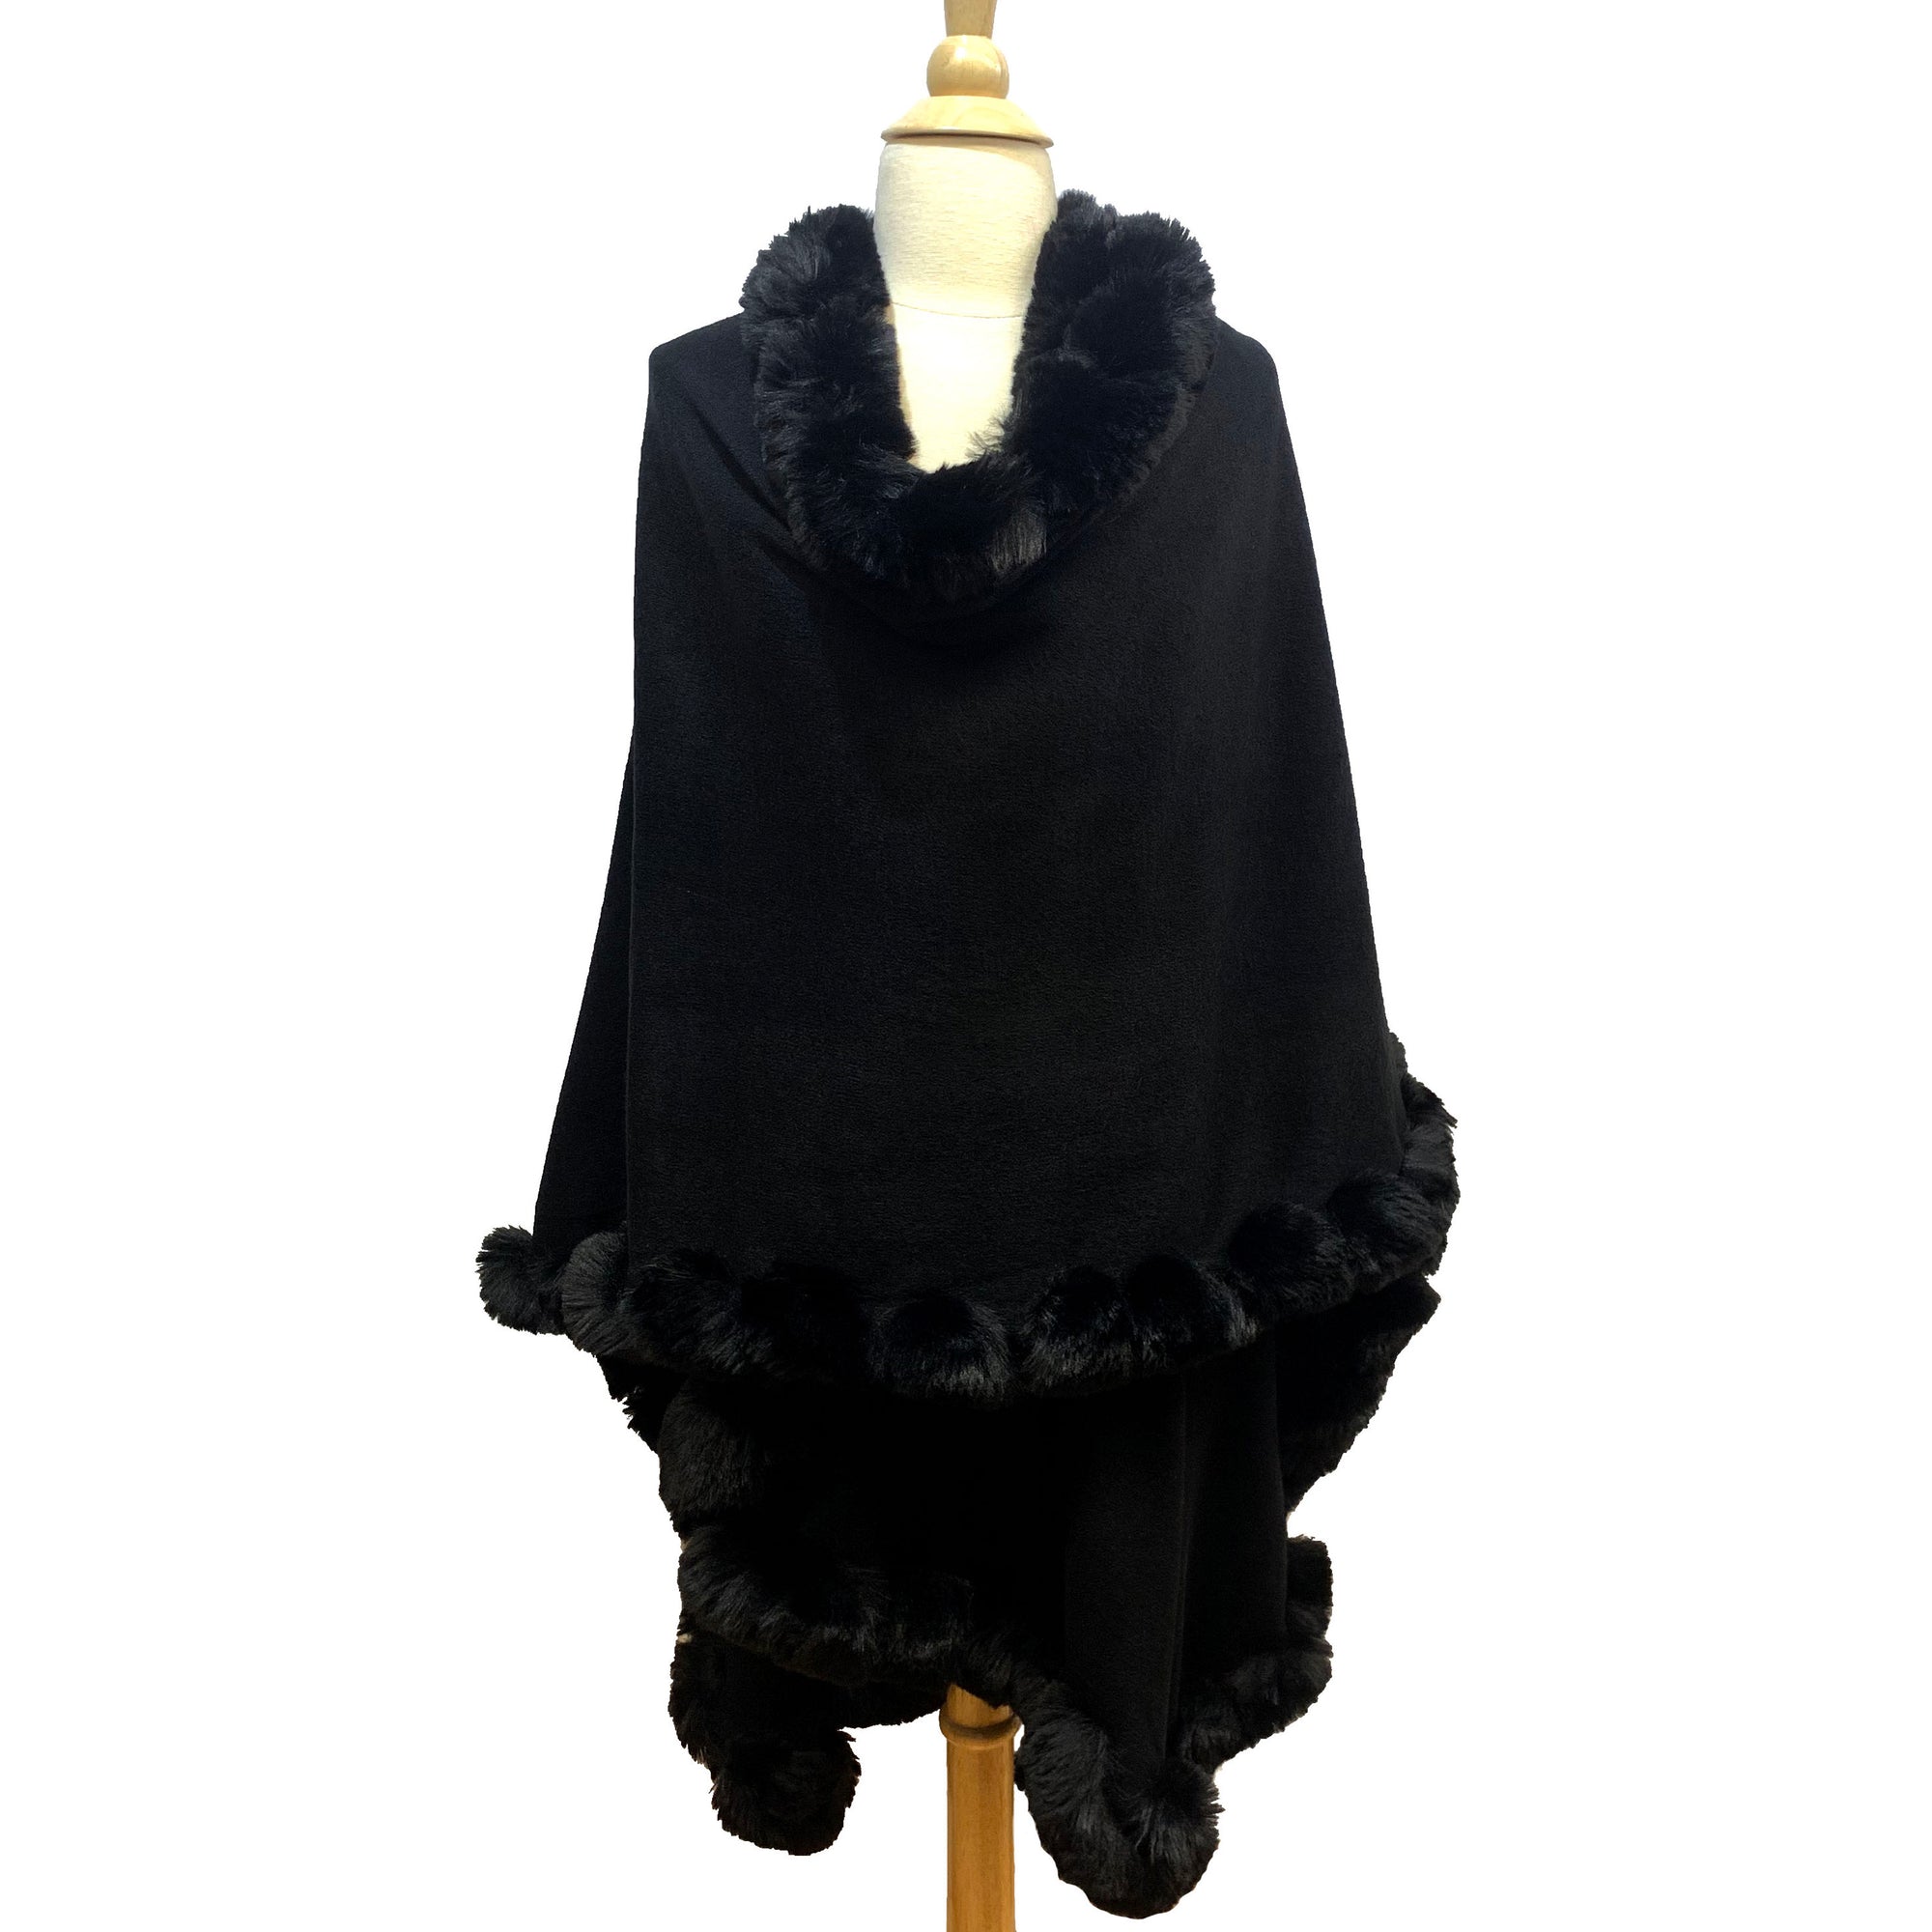 Elegant All-around Faux Fur Trim Poncho Plush Faux Fur Trim Knit Ruana Cape Faux Fur Knit Wrap, the perfect accessory, luxurious, trendy, soft chic cape, keeps you warm & toasty. Throw it on over many pieces to elevate any casual outfit! Perfect Gift Birthday, Anniversary, Christmas, Valentine's Day, Special Occasion